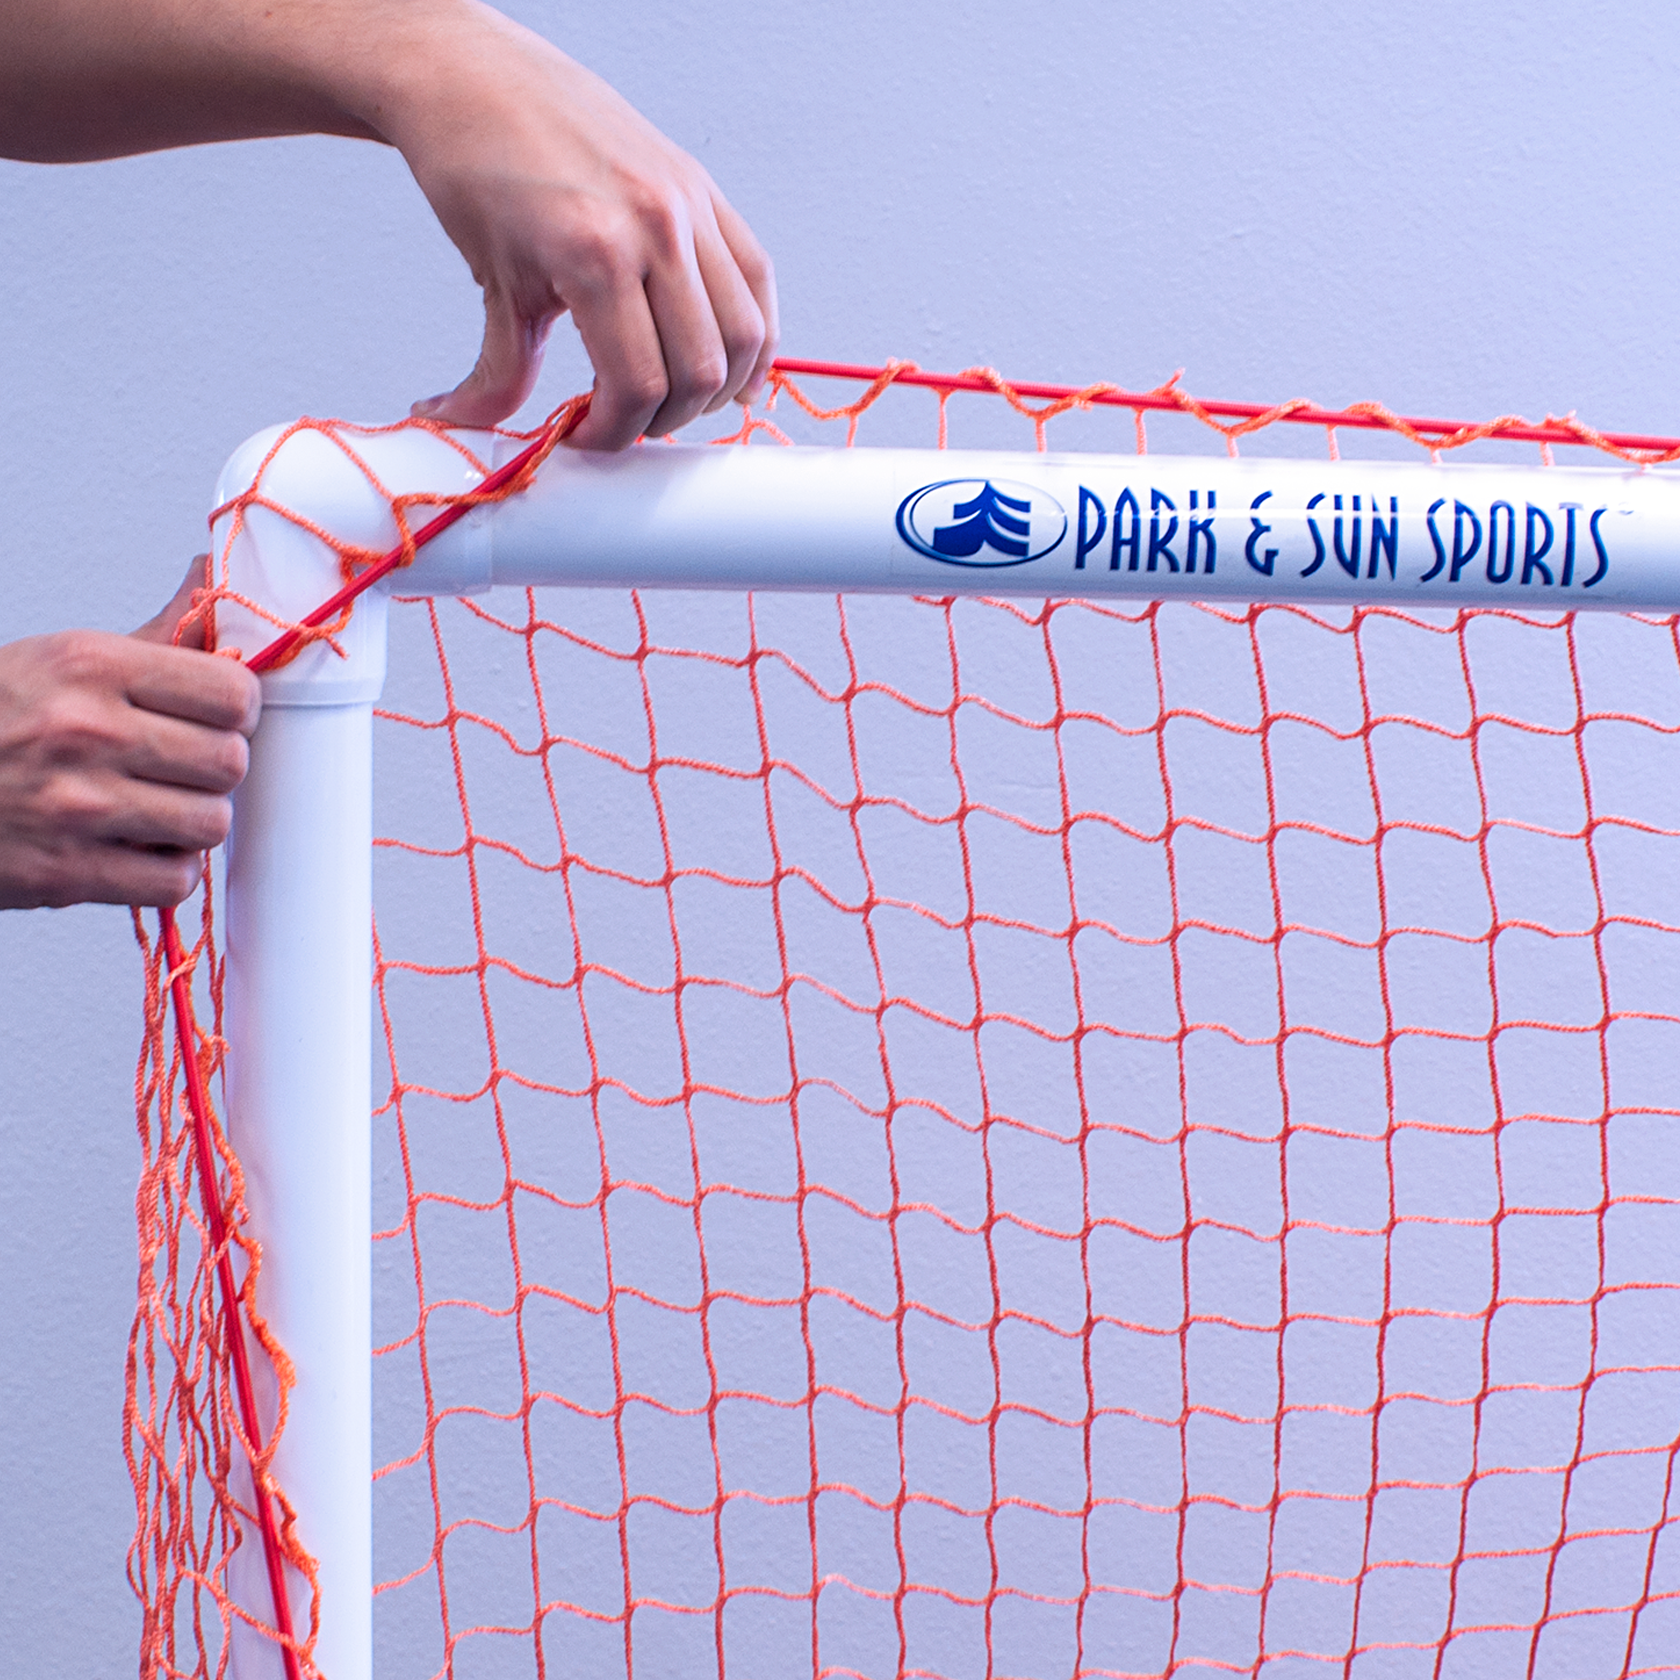 6 W x 6 H x 7 D White Lacrosse Goal Park & Sun Sports Indoor/Outdoor Nylon Bungee Slip Net with Velcro Sleeves 